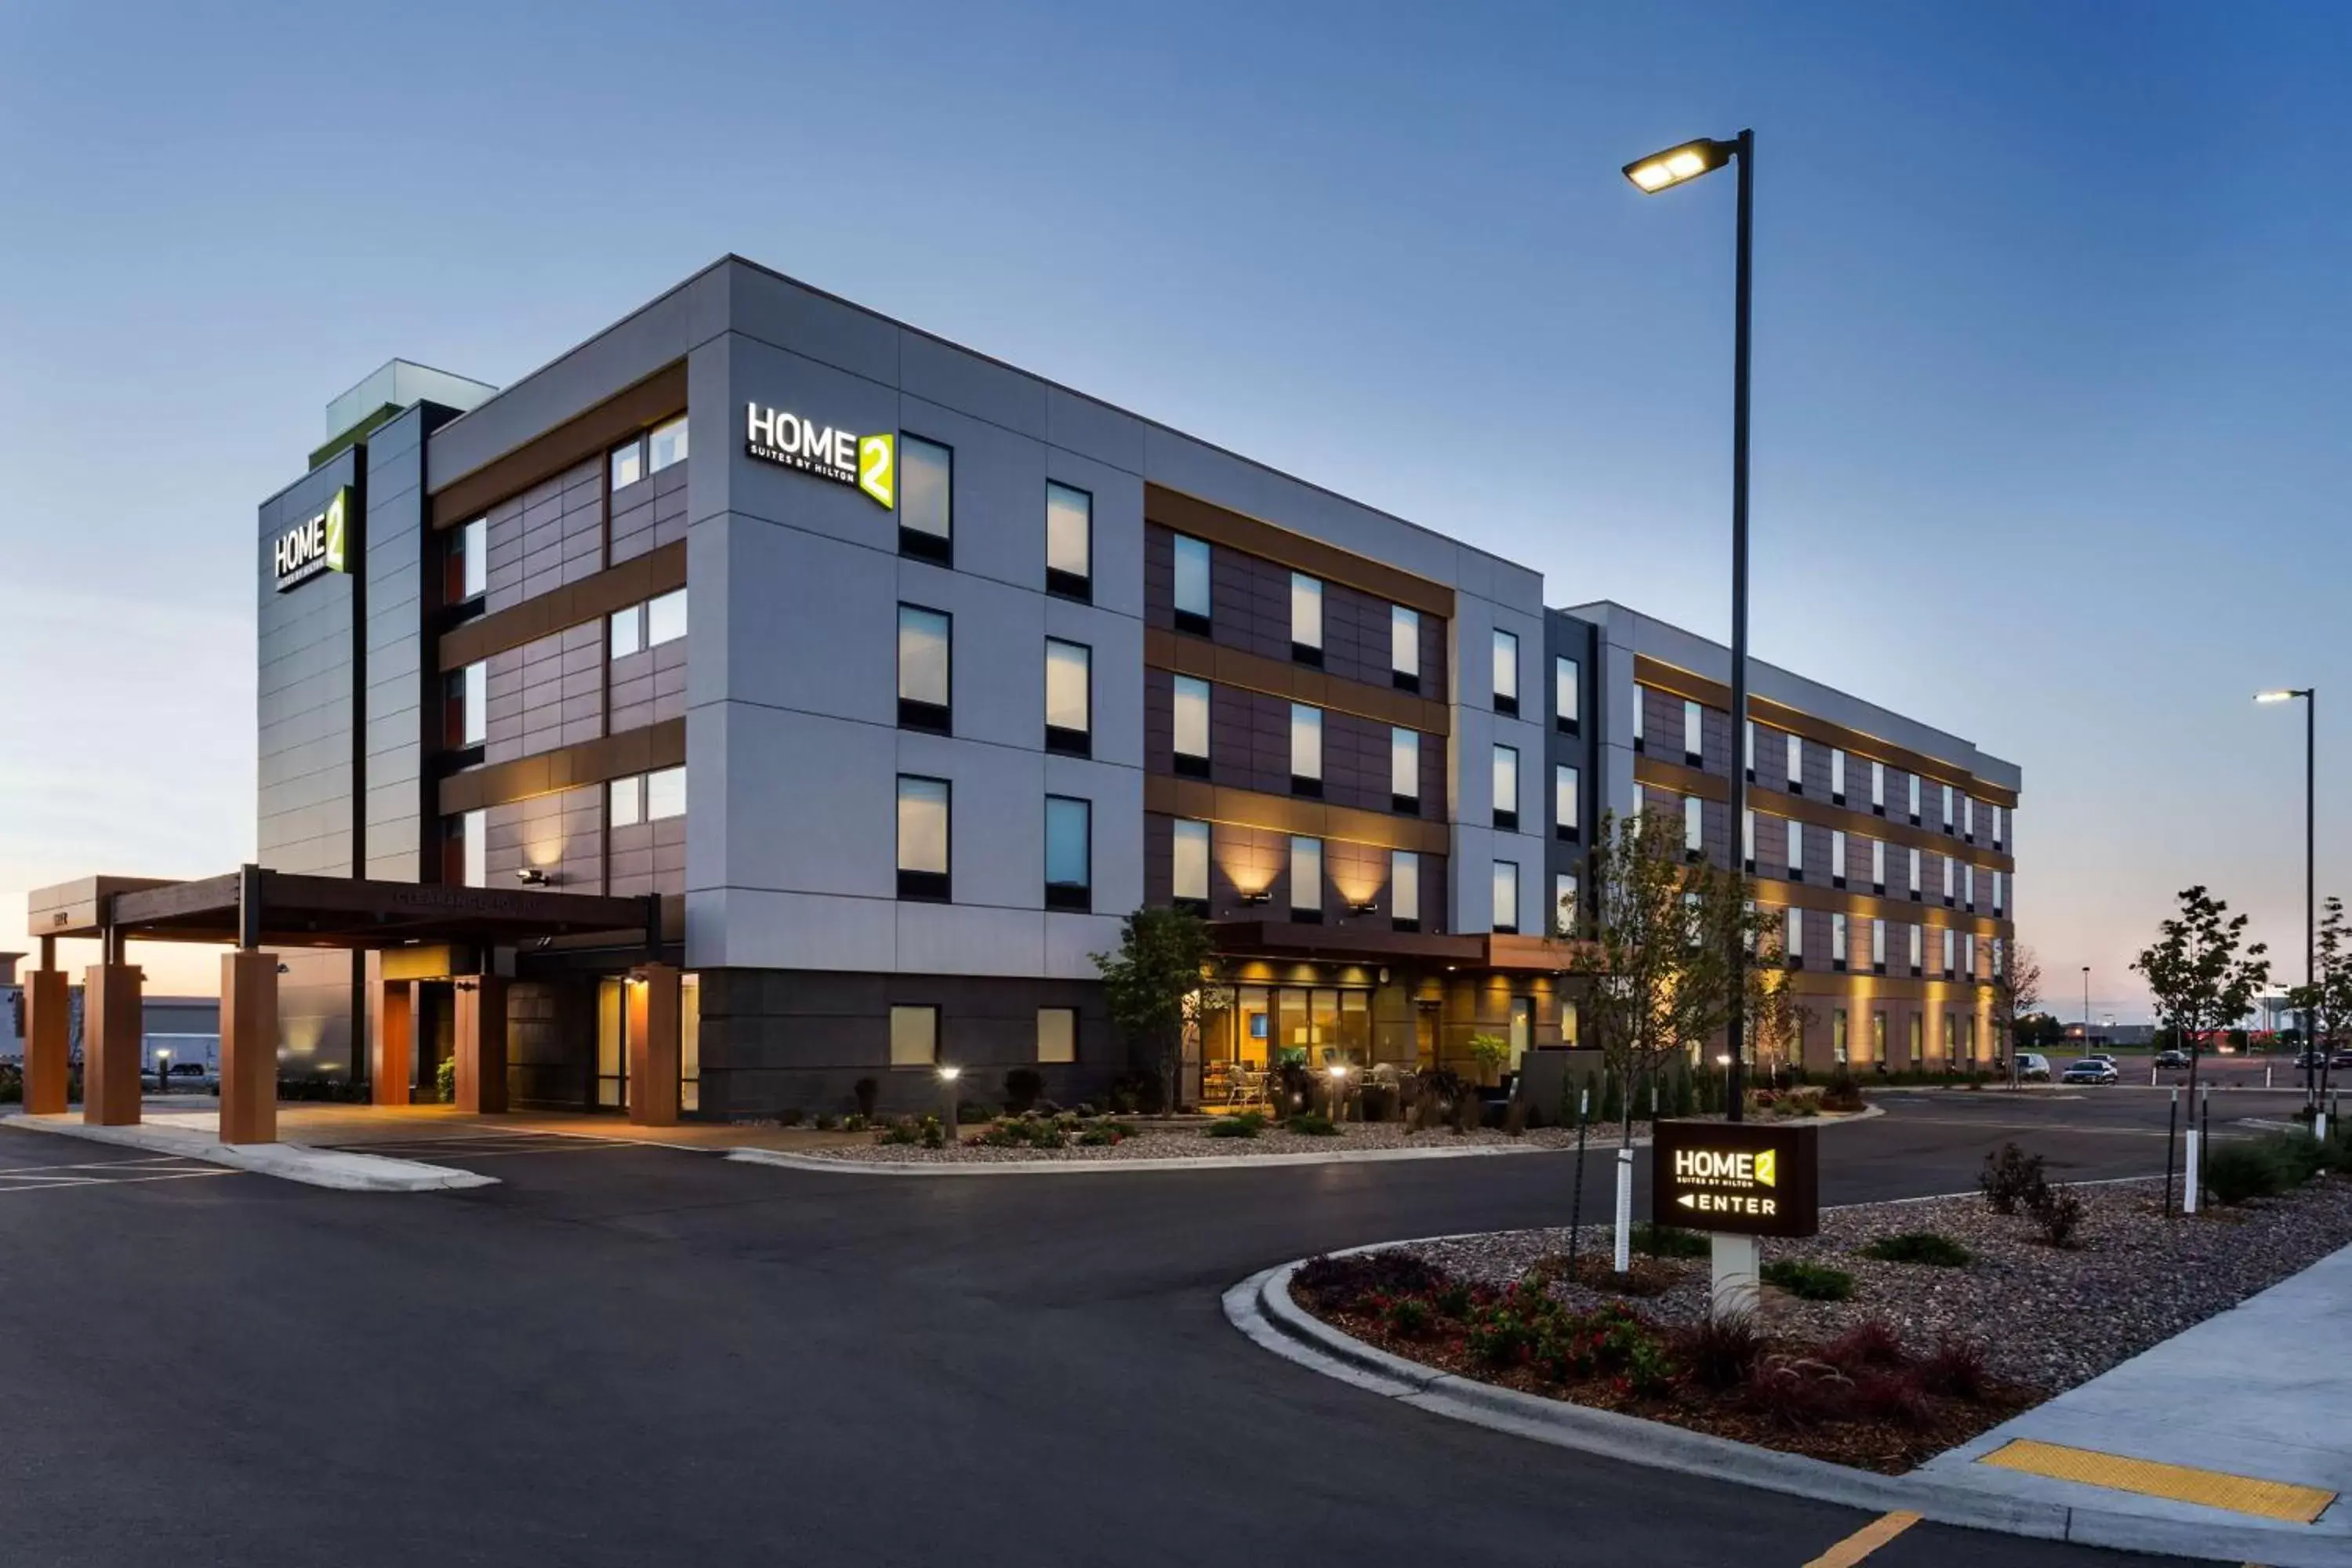 Property Building in Home2 Suites by Hilton Fargo